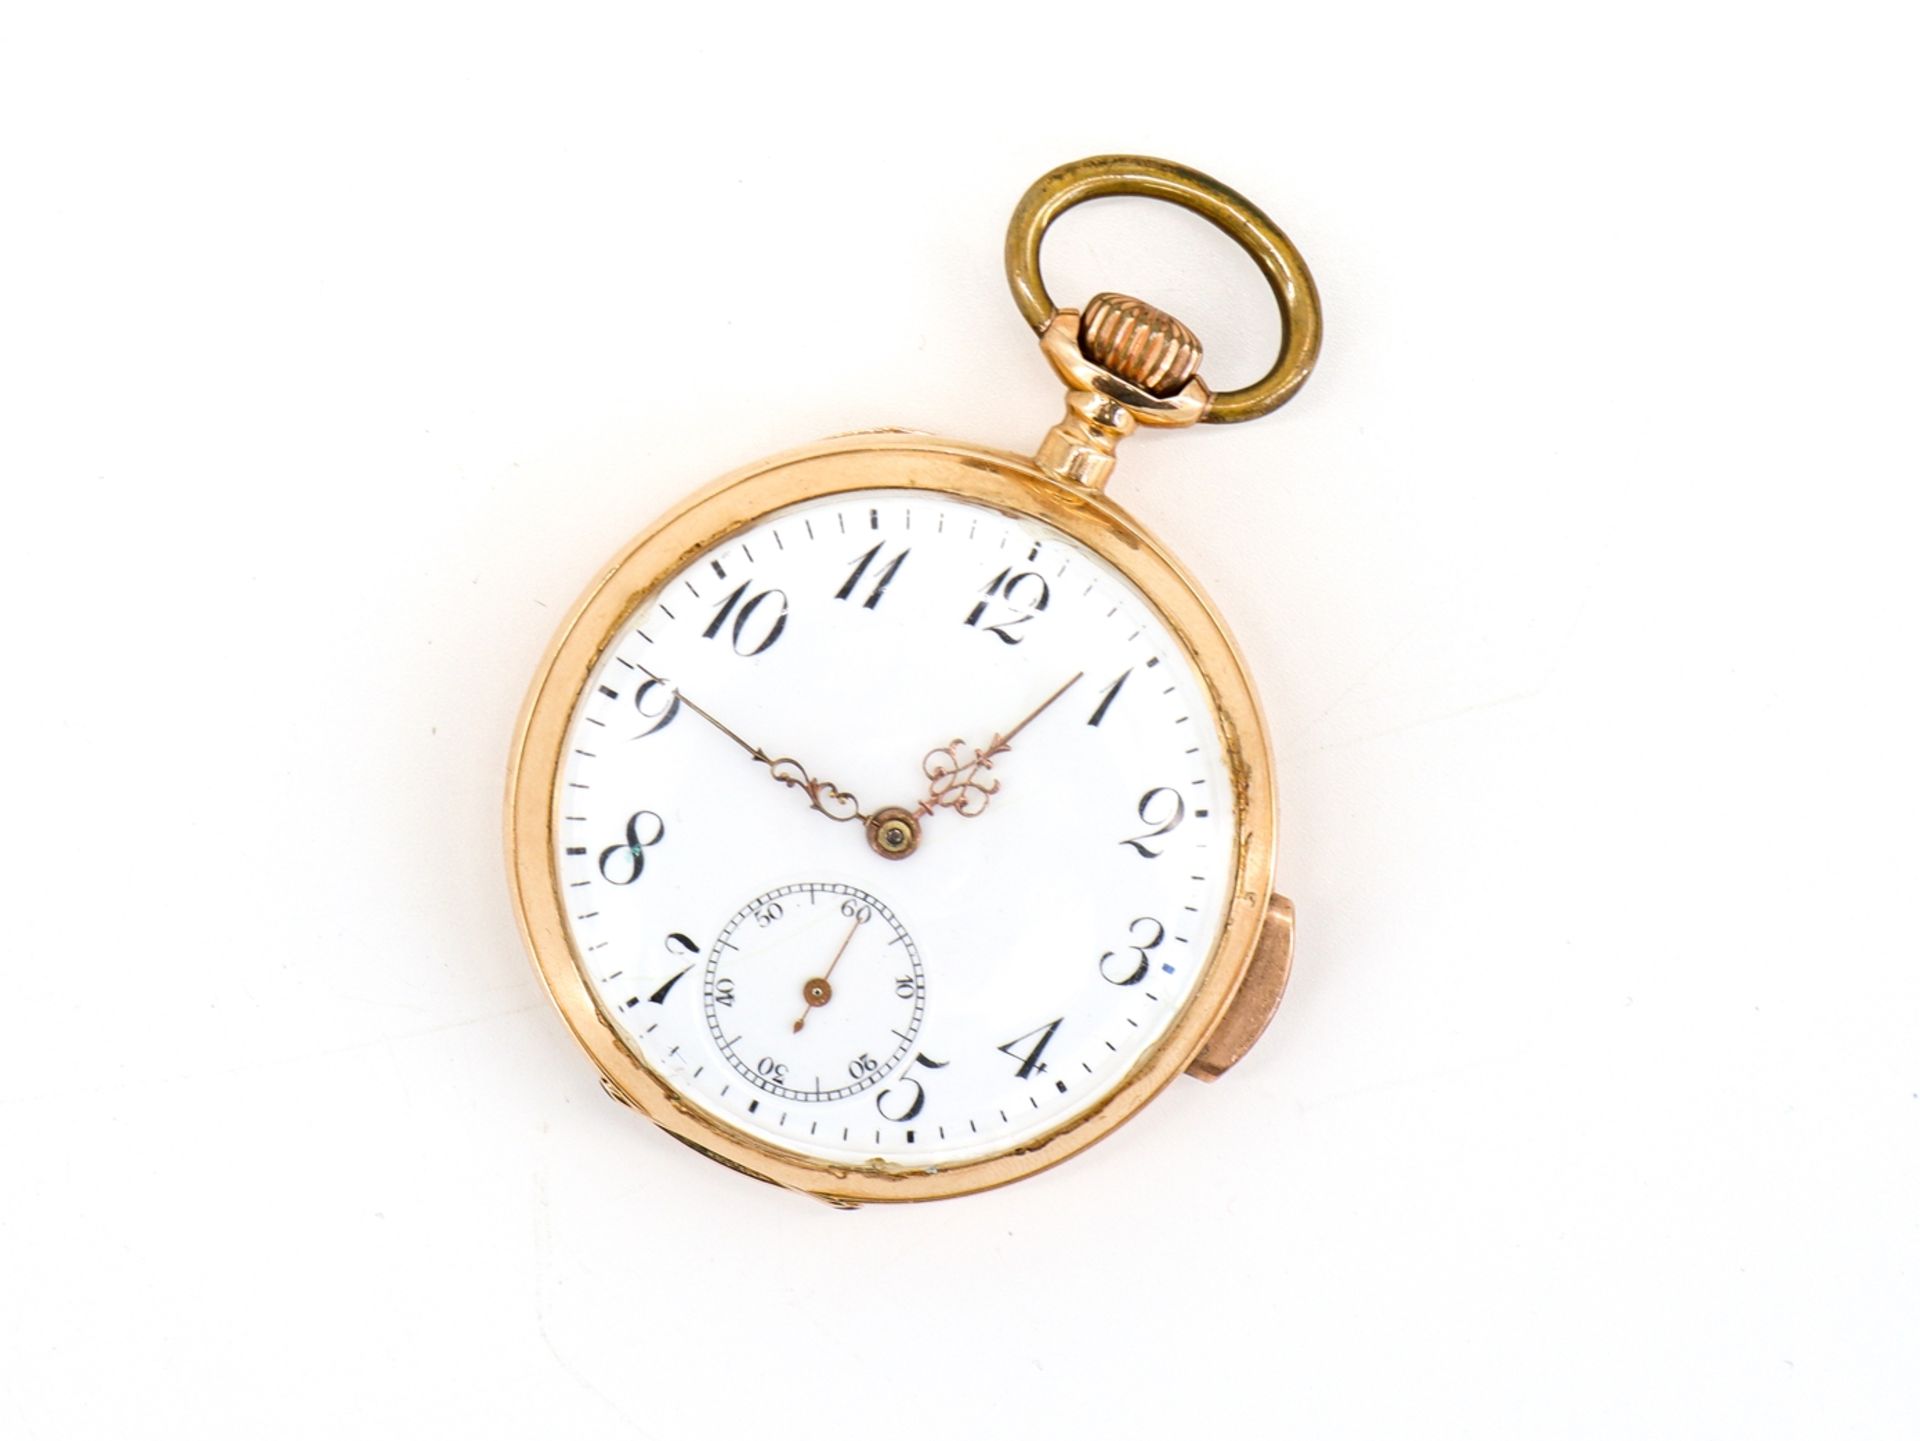 Pocket watch 14K, 585 red gold with small second and 1/4 hour repeater. - Image 8 of 8